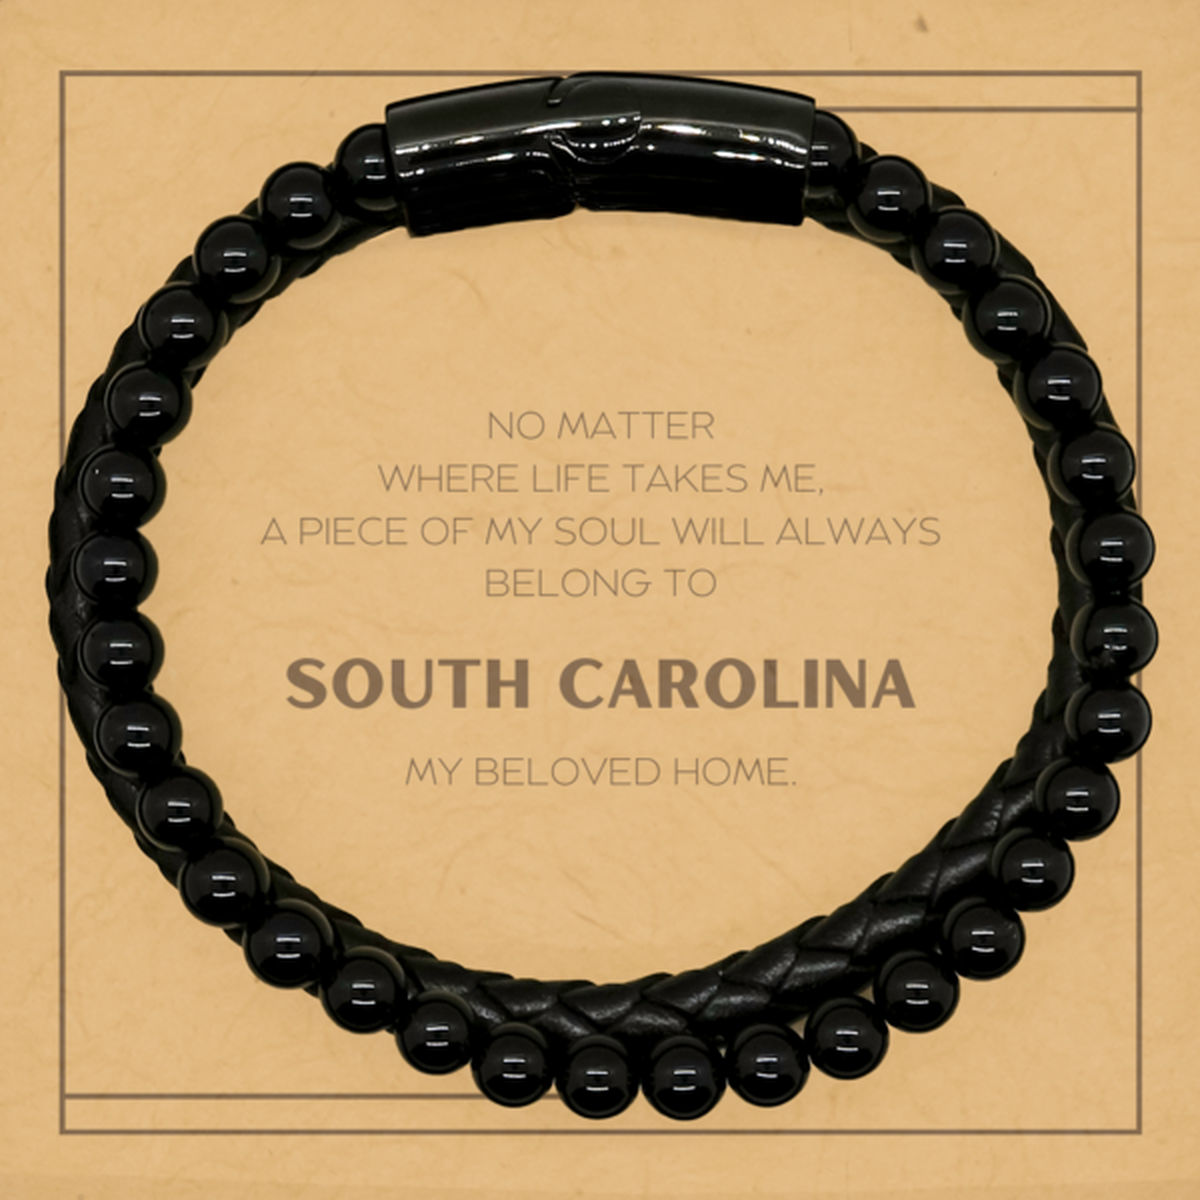 Love South Carolina State Gifts, My soul will always belong to South Carolina, Proud Stone Leather Bracelets, Birthday Unique Gifts For South Carolina Men, Women, Friends